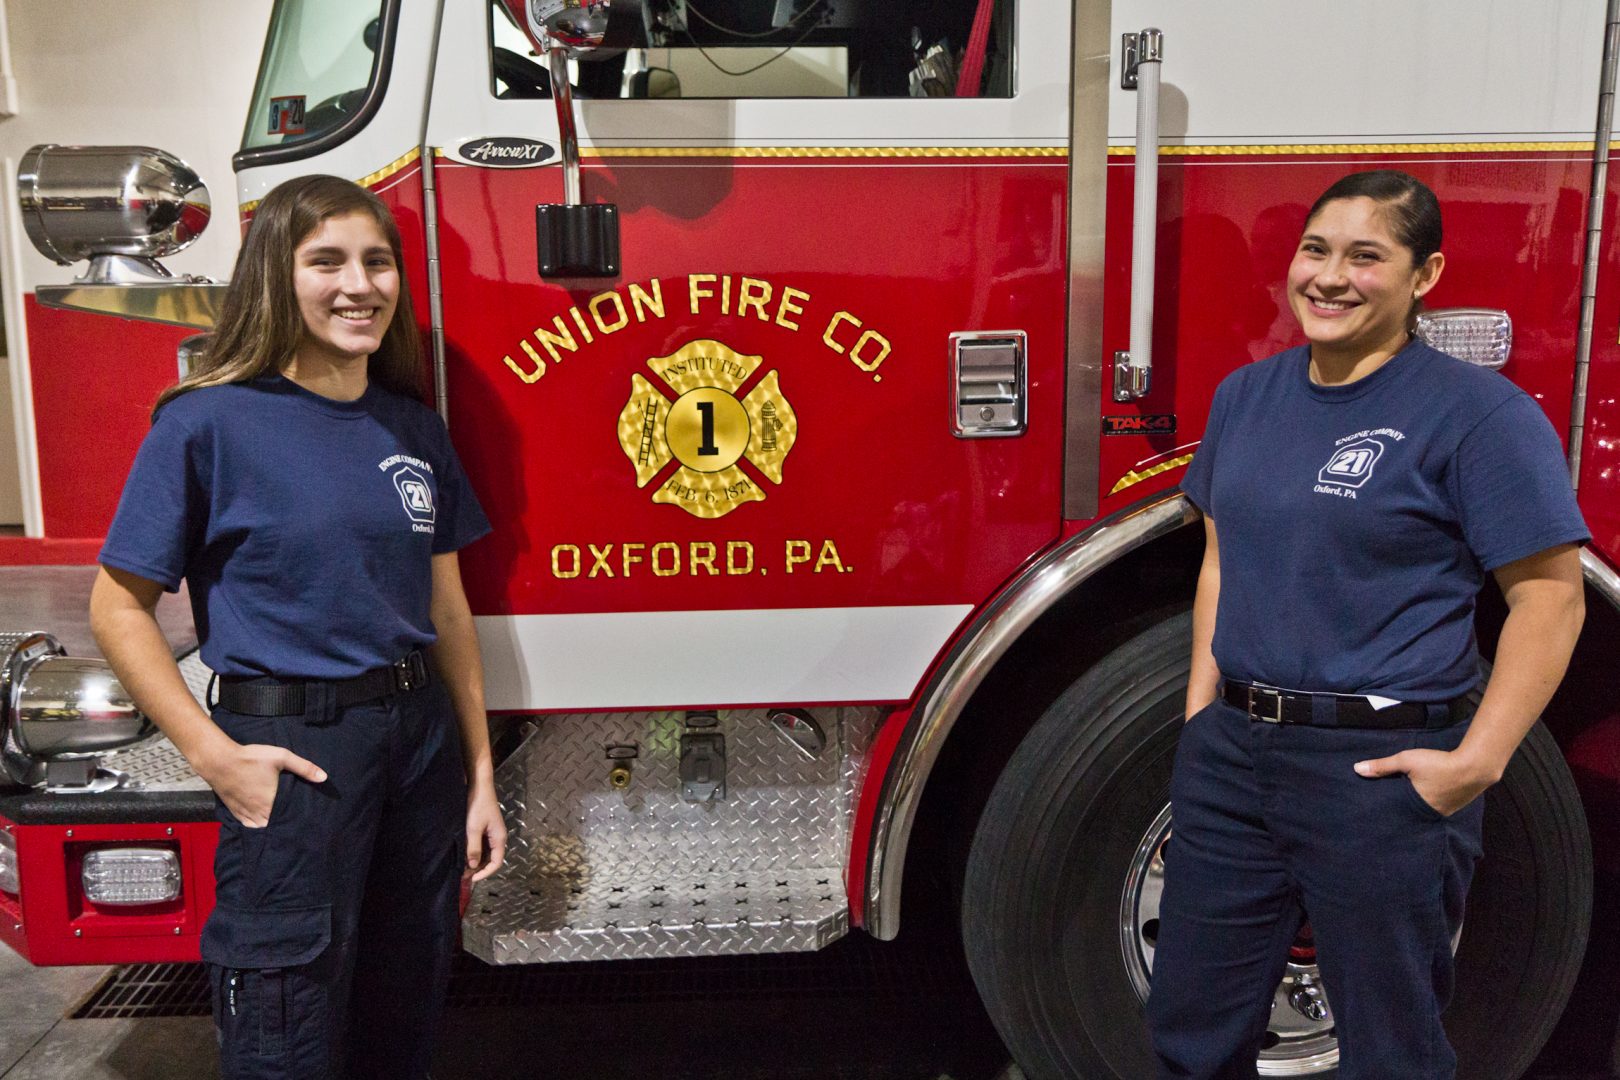 Carolena Nava and her mom Lupita Nava are firefighters in Oxford, Pa.